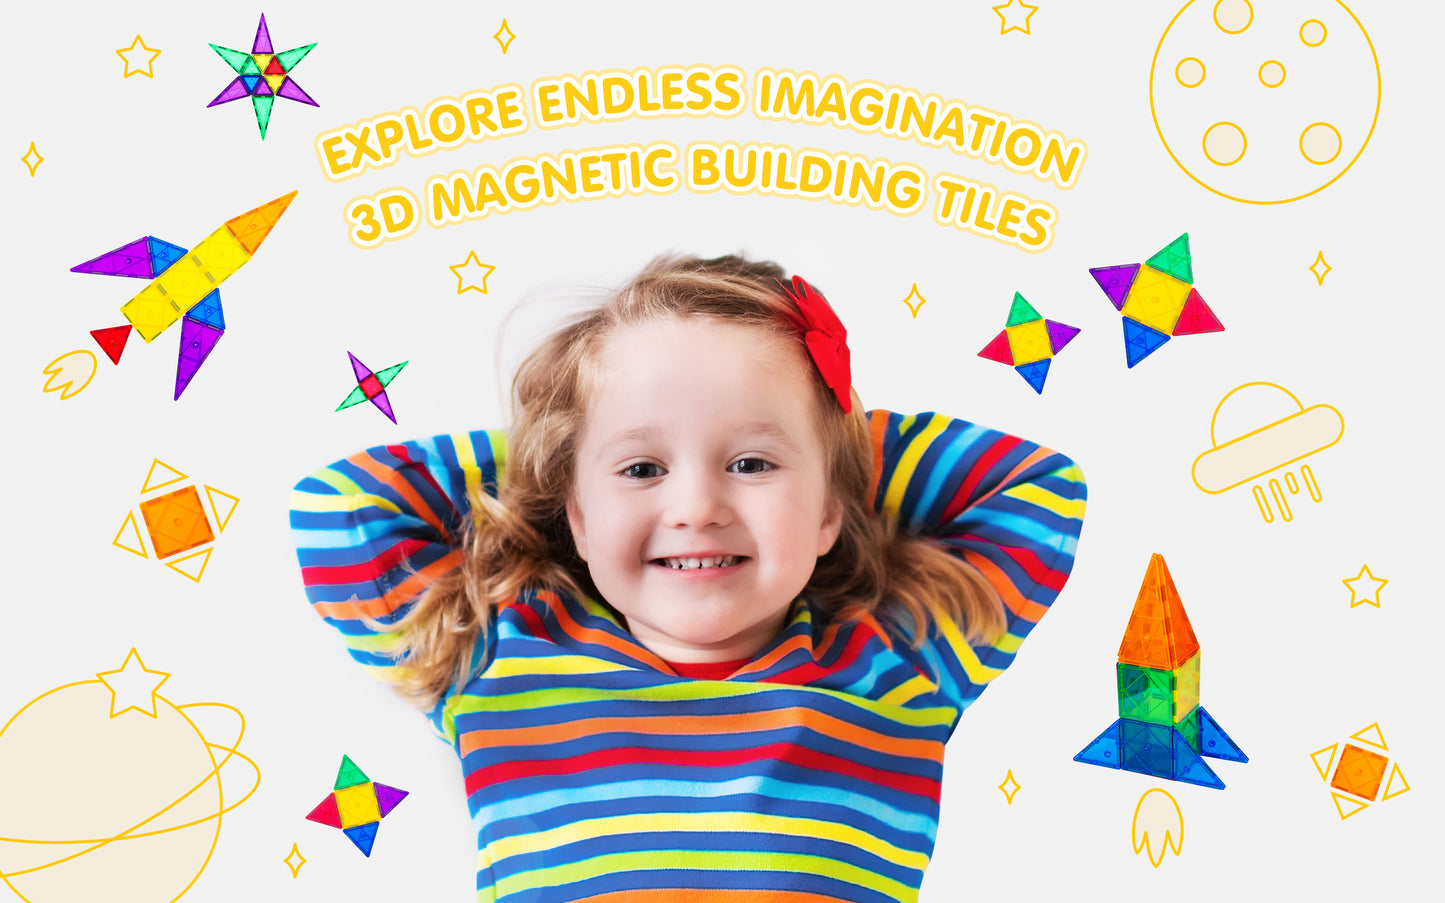 PLUMIA Magnets for Kids Learning Toys Magnetic Building Blocks Educational Toddler Toys Magnetic Tiles STEM Toys Gift for 3 4 5 Year Olds Boys and Girls